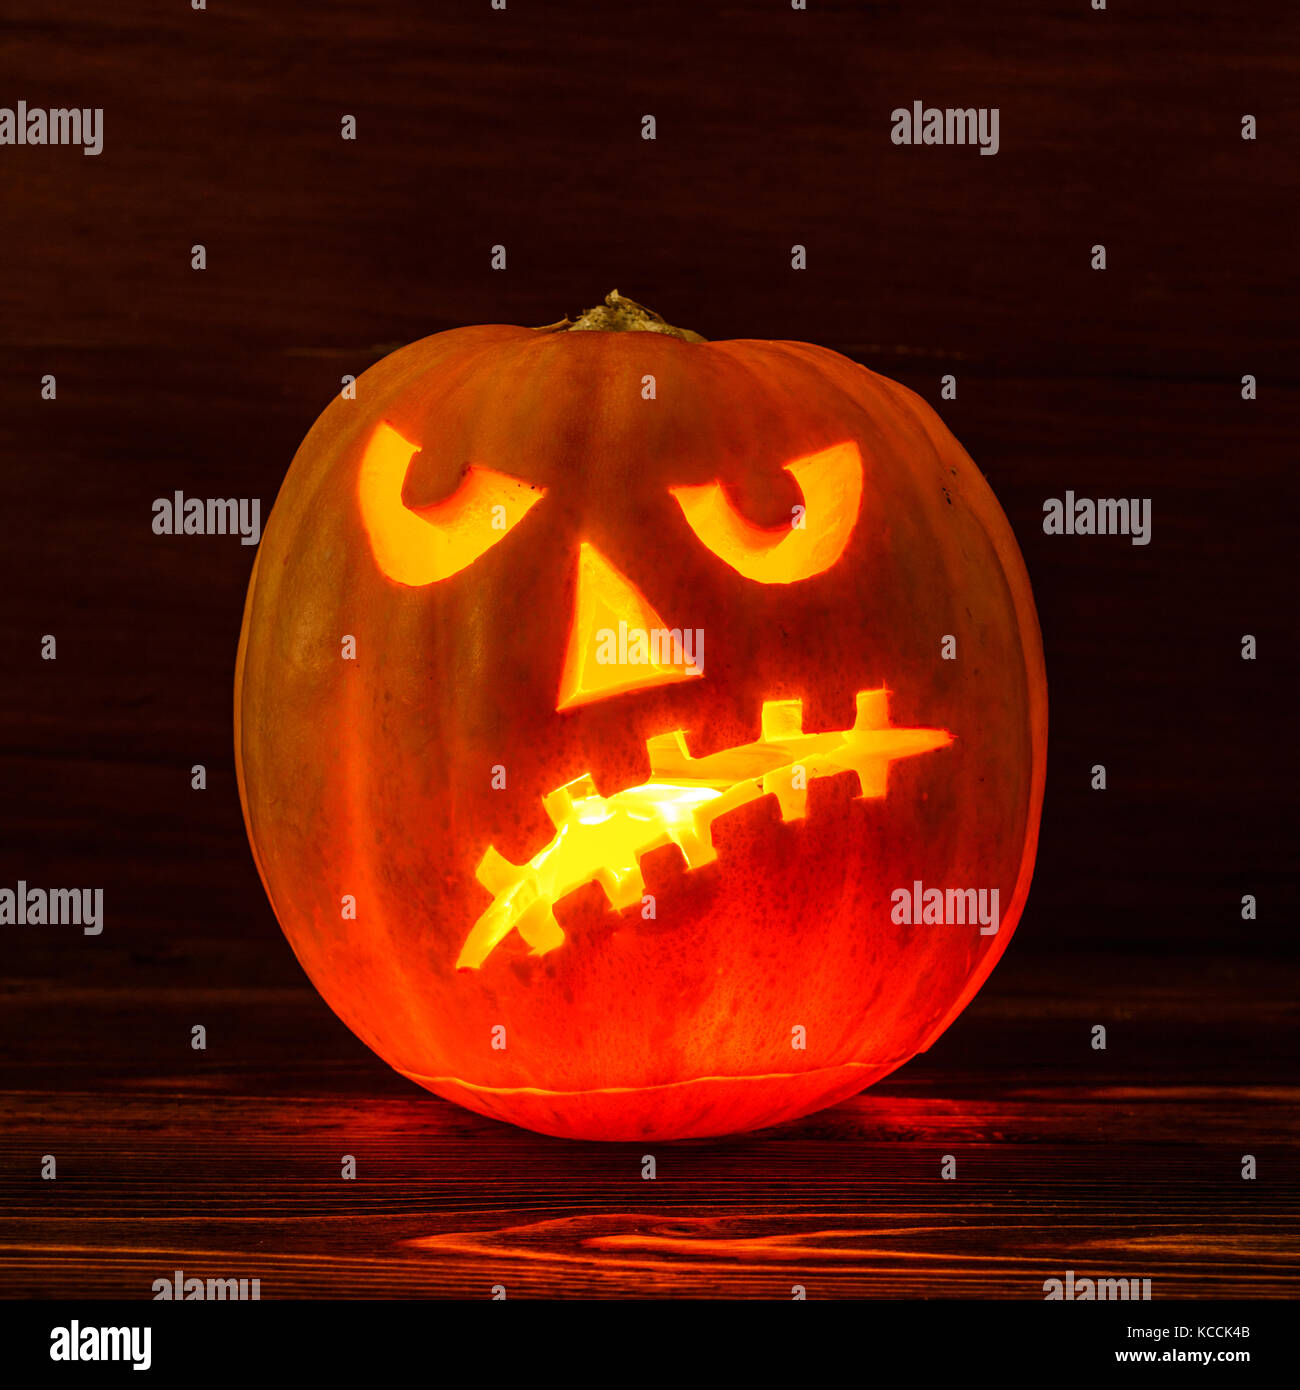 Scary Halloween pumpkin isolated on a wooden background . Scary glowing face trick or treat. Concept of halloween pumpkin on wooden planks. Stock Photo